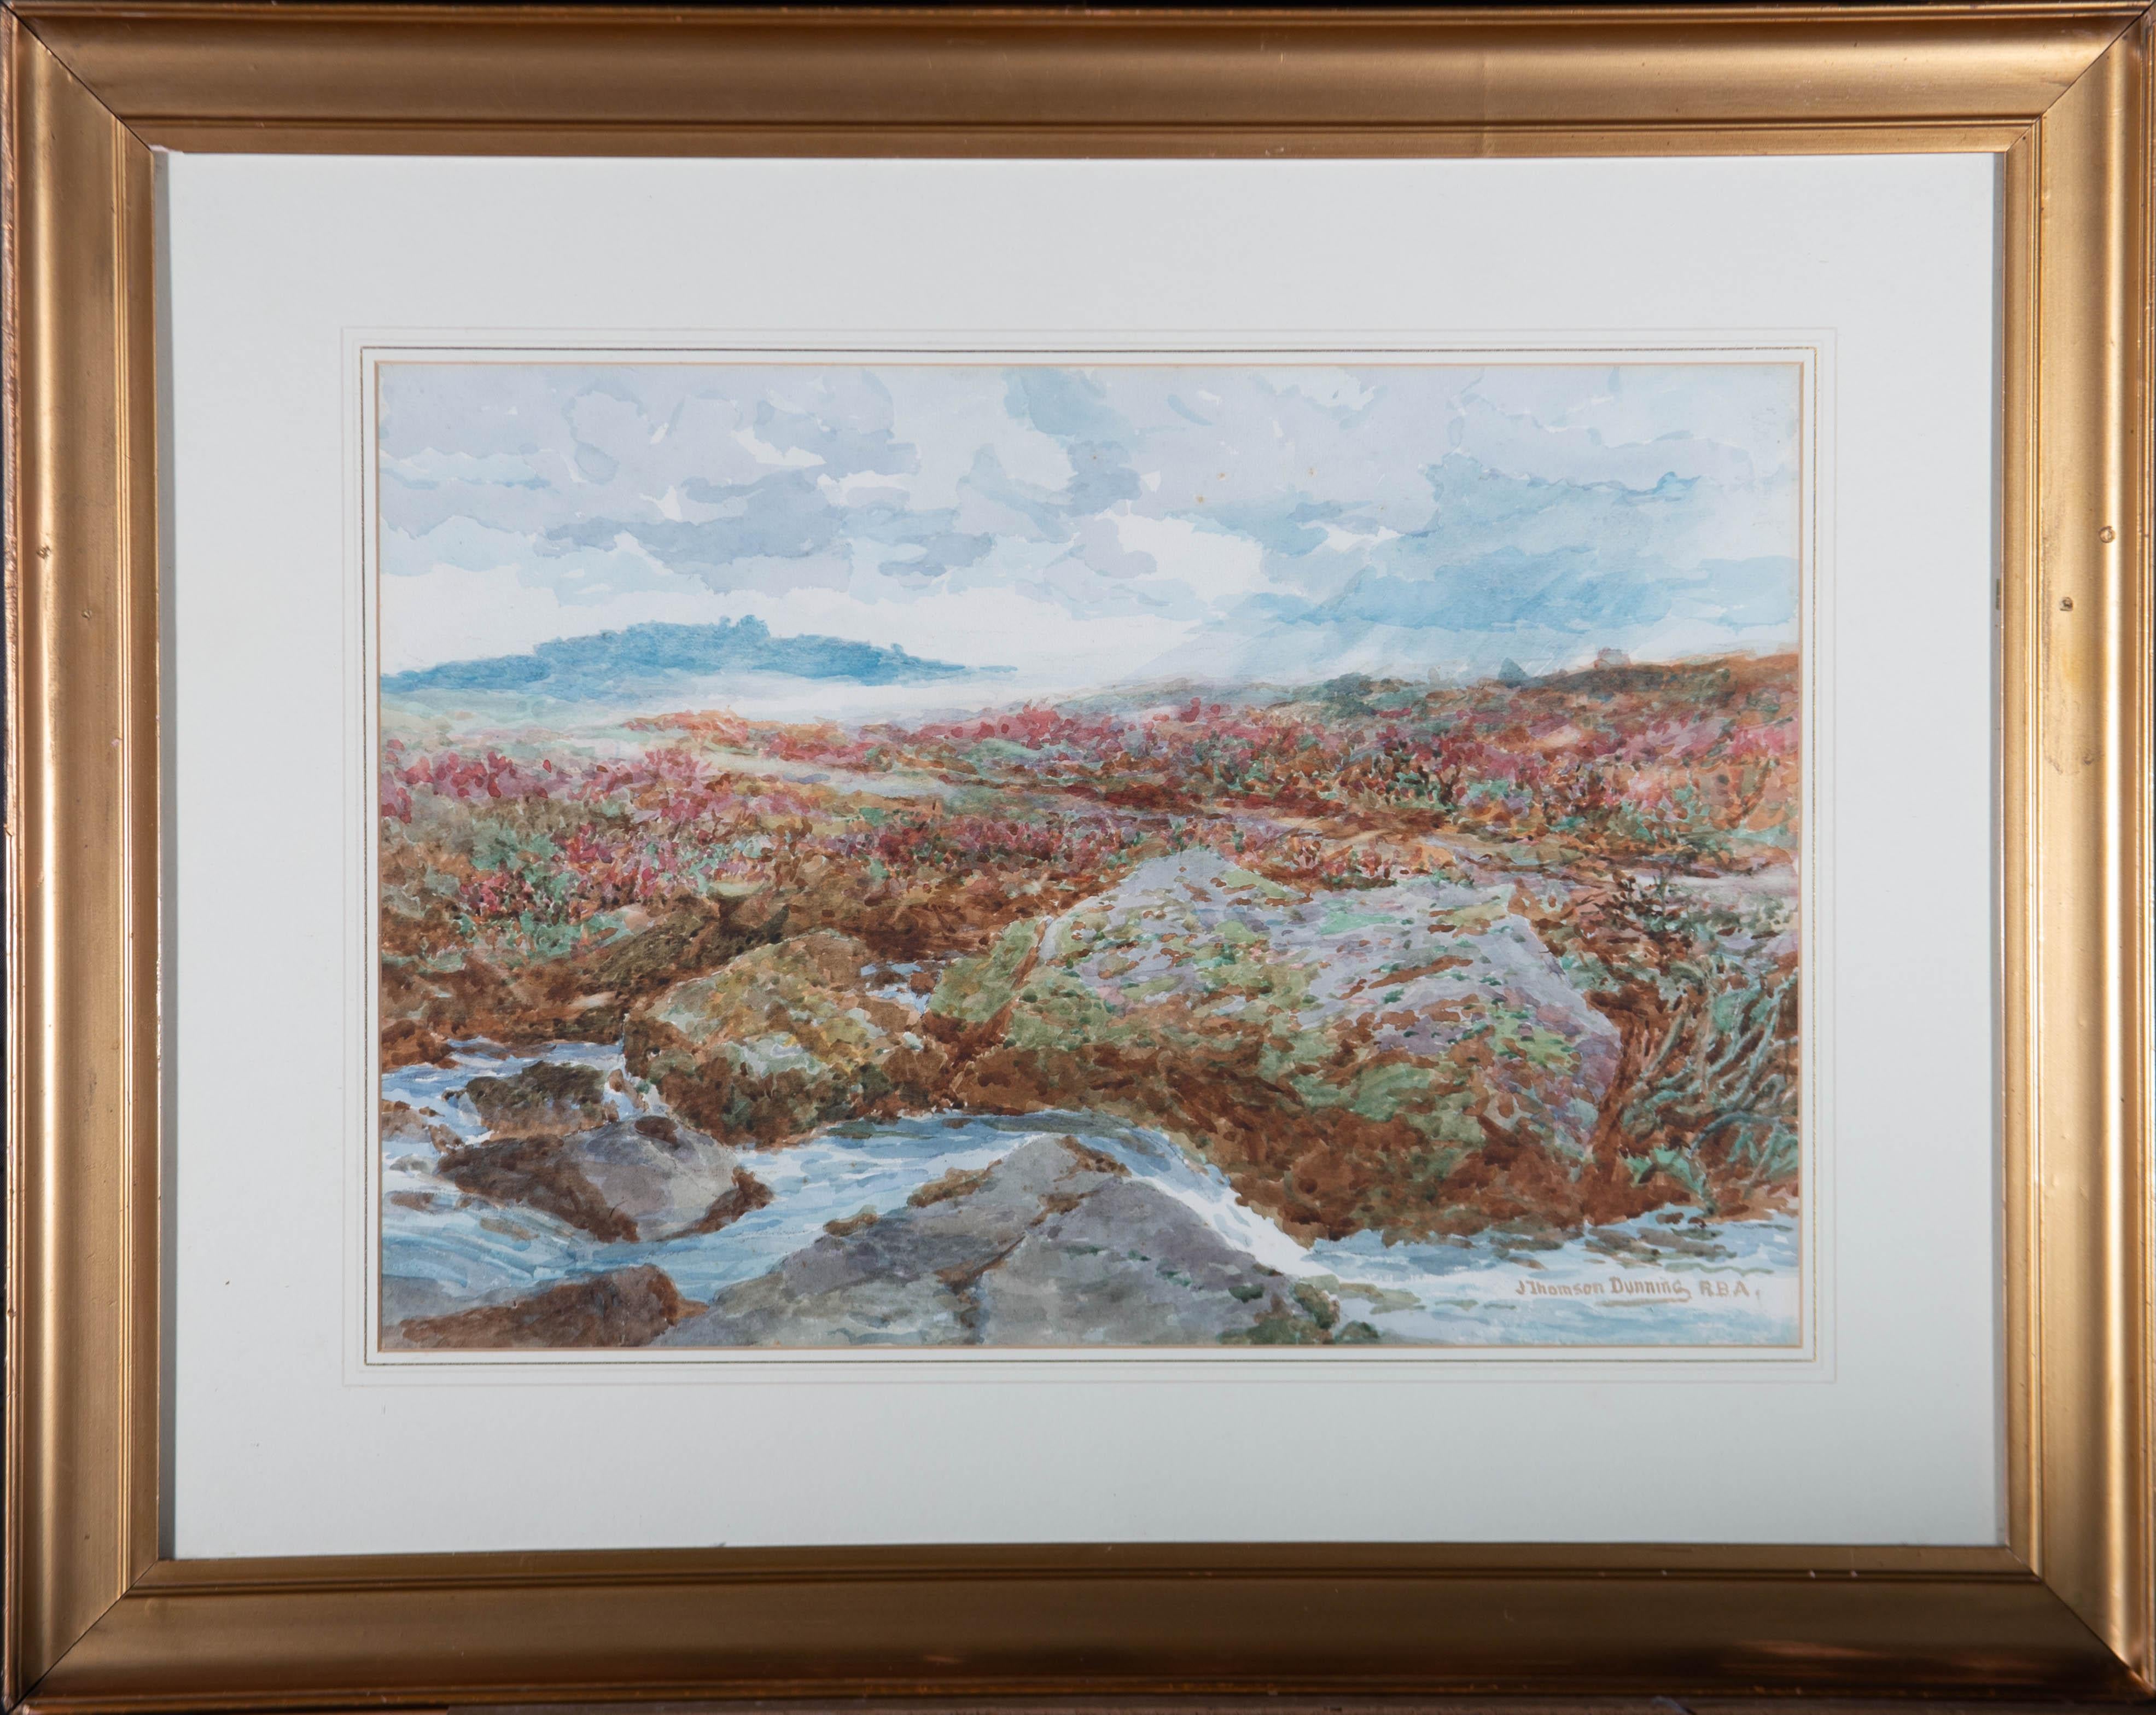 An accomplished landscape at Wedlake Tor on Peter Tavy Common in Dartmoor. Presented glazed in a wash line mount with gold detailing and a distressed gilt-effect wooden frame. Signed to the lower-right edge. There is a faded original label on the